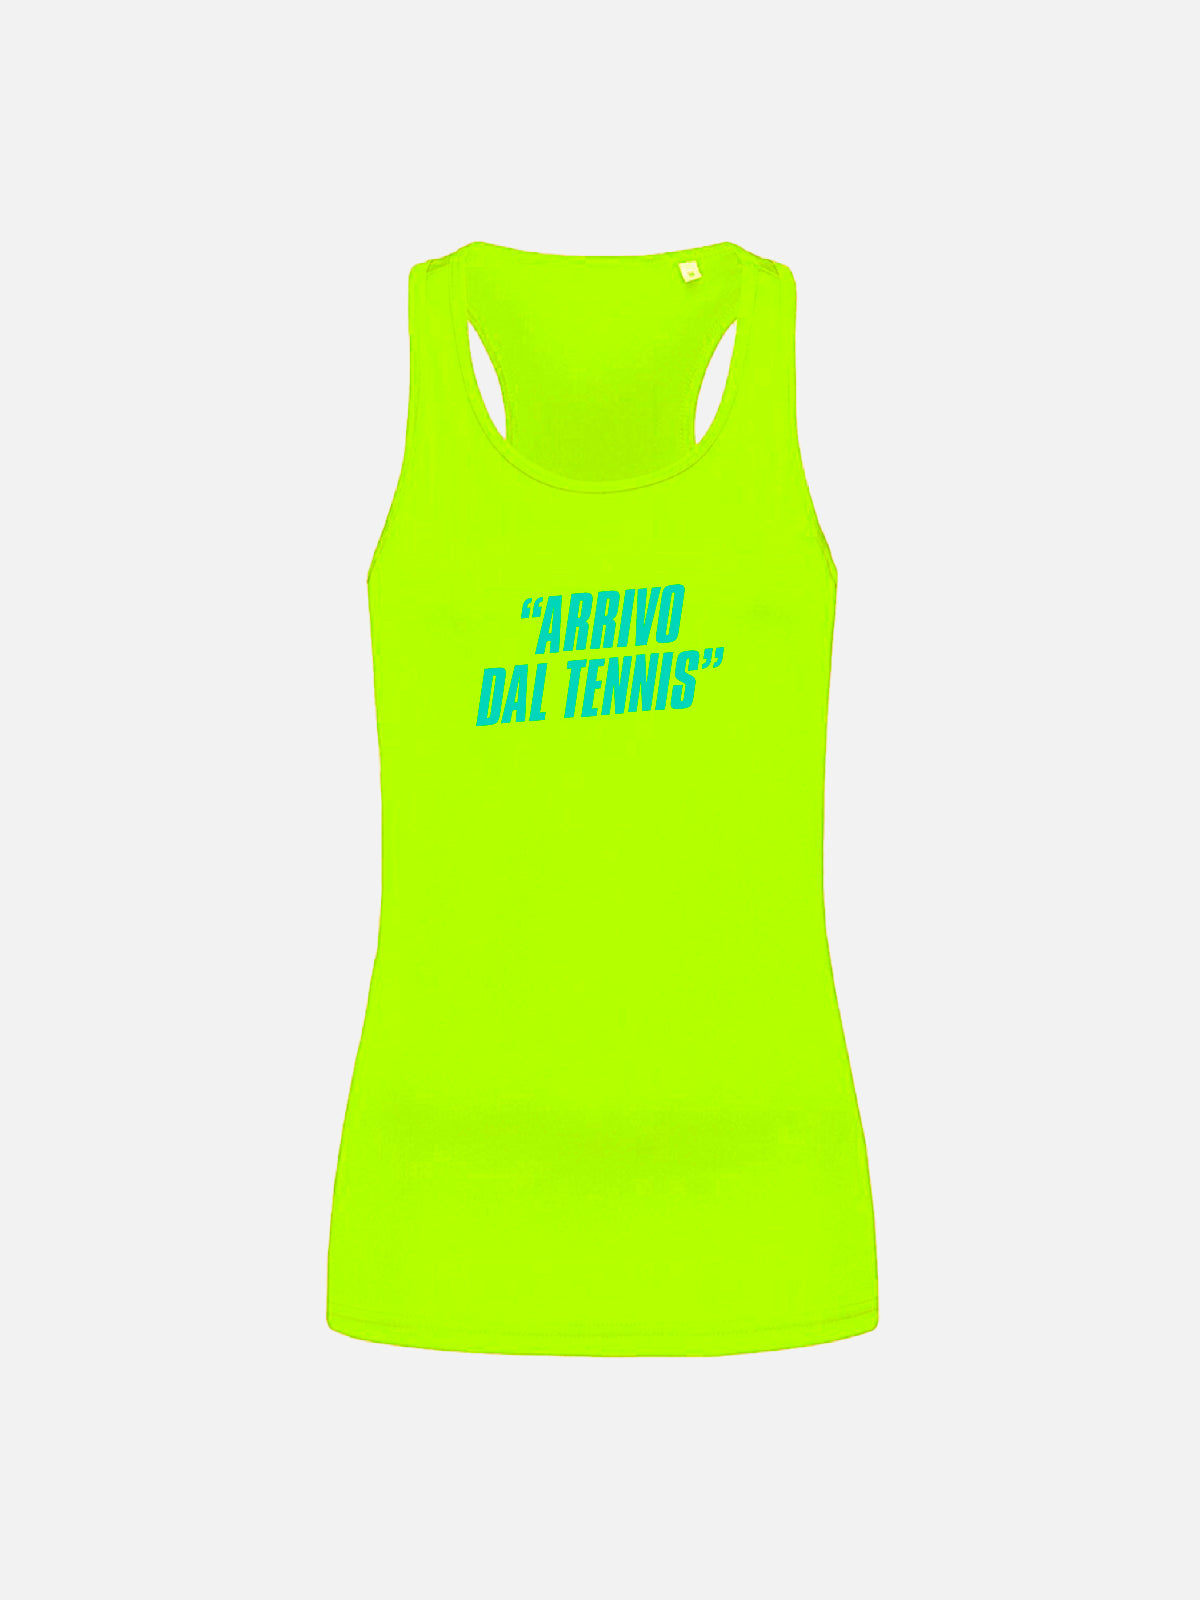 Personalized Tank Top -"Arrival From Tennis"